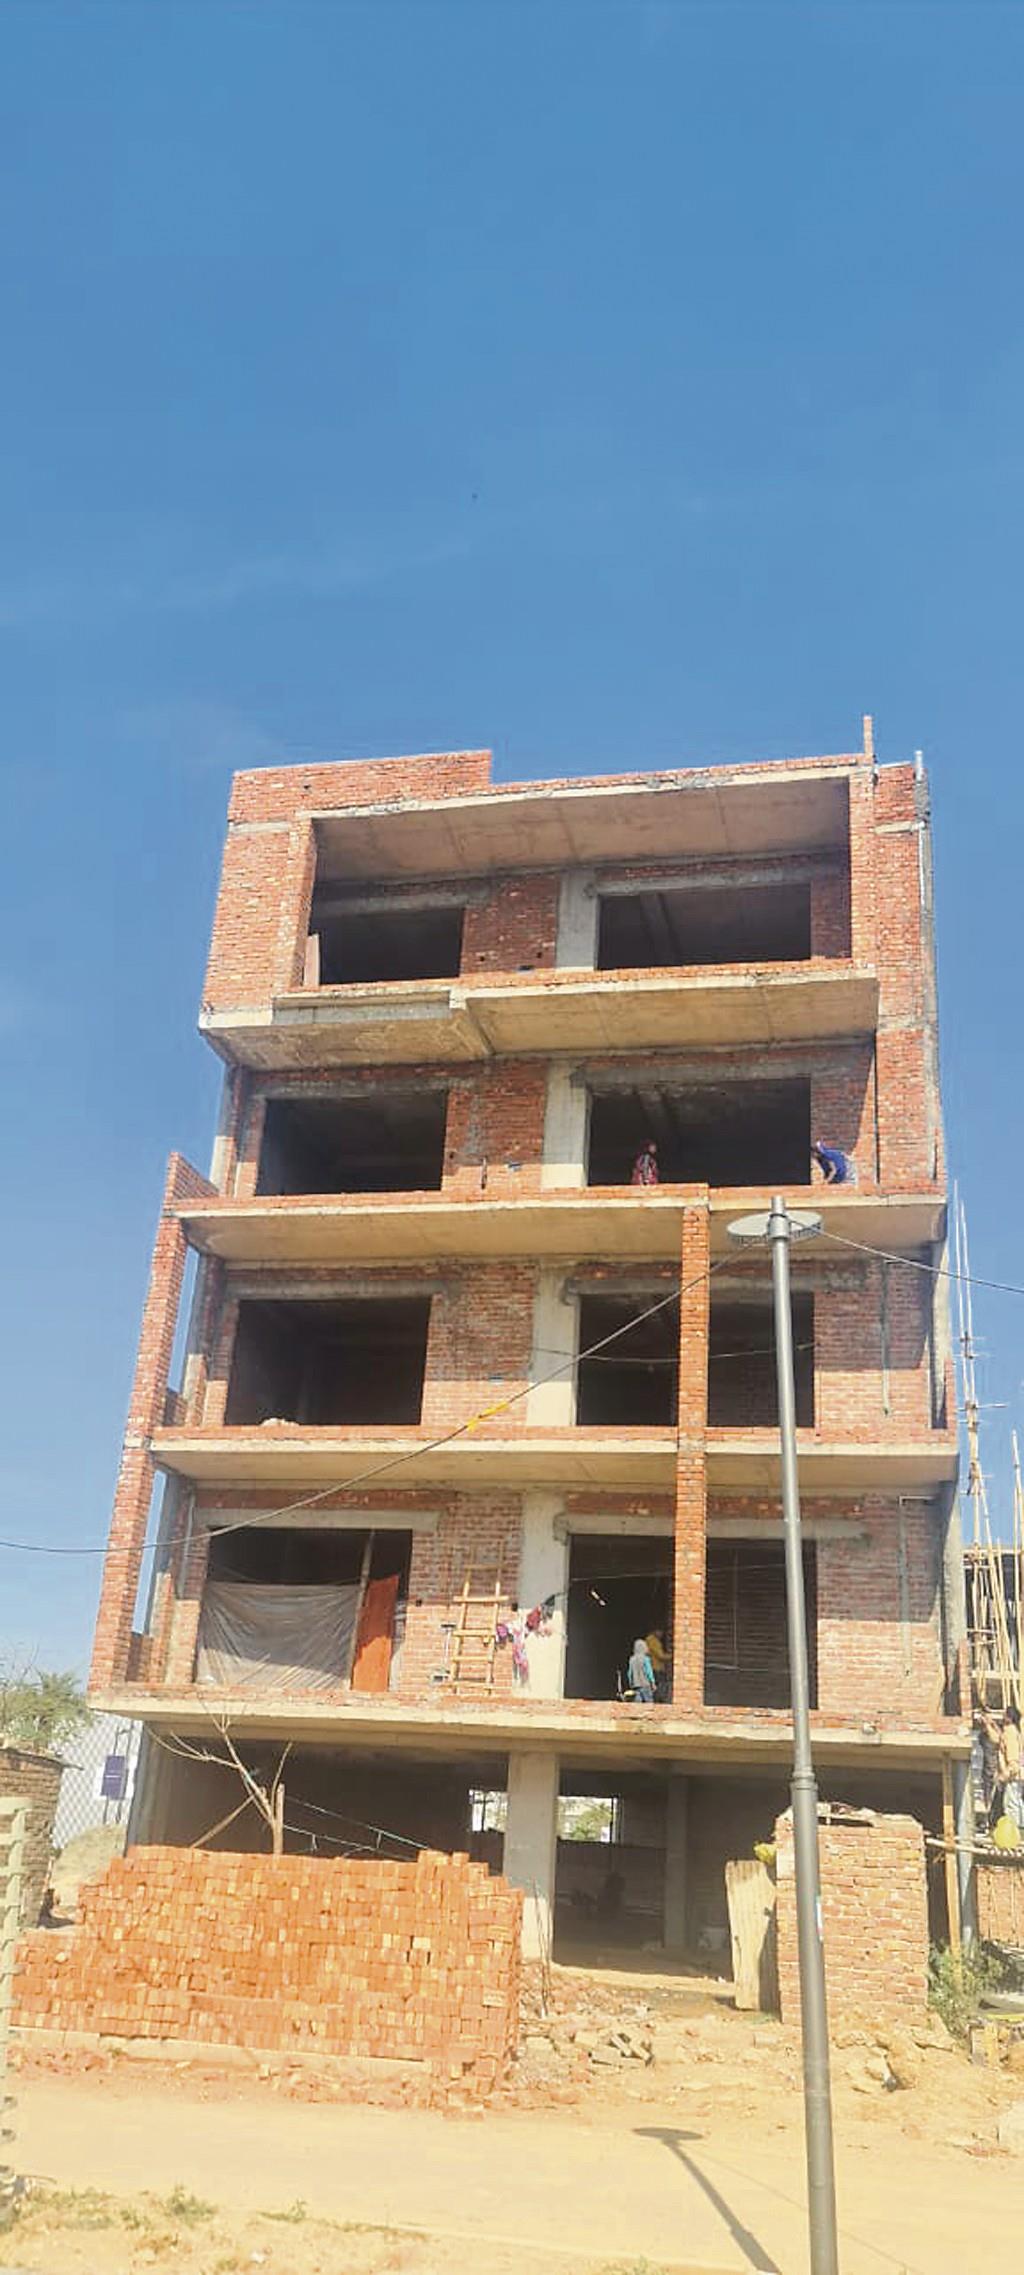 Plot owners in fix as state yet to decide on stilt+4 floor houses